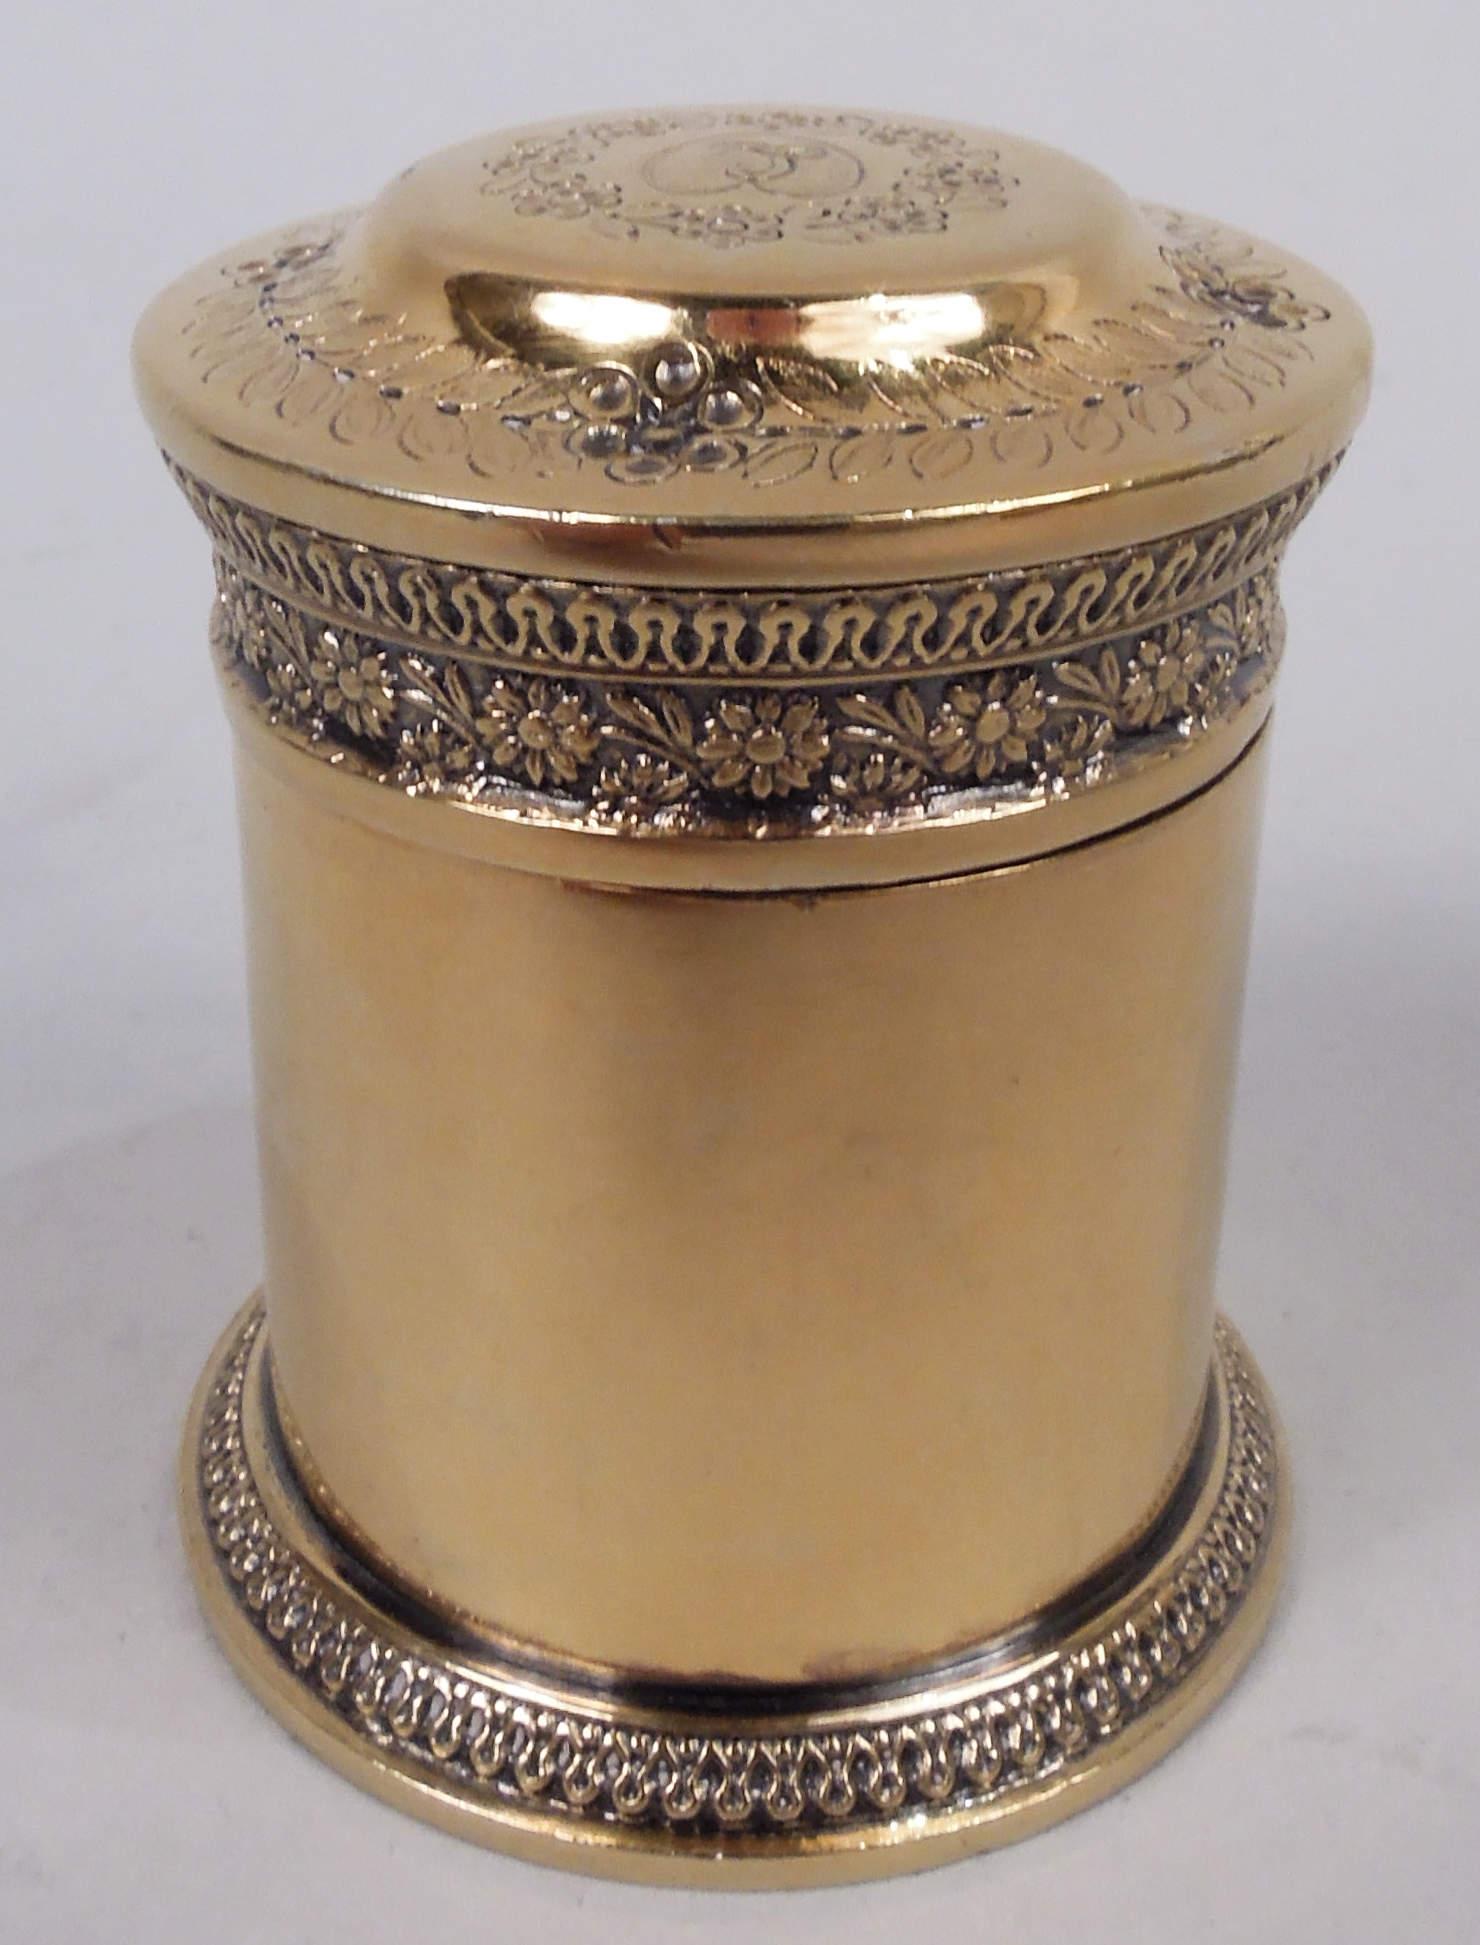  Restauration Classical silver gilt box. Made by Jean-Baptiste Claude Odiot in Paris, ca 1820. Drum form with spread base; cover raised. Cast egg-and-dart and floral rims. Heart engraved with single script letter monogram set in flower wreath on